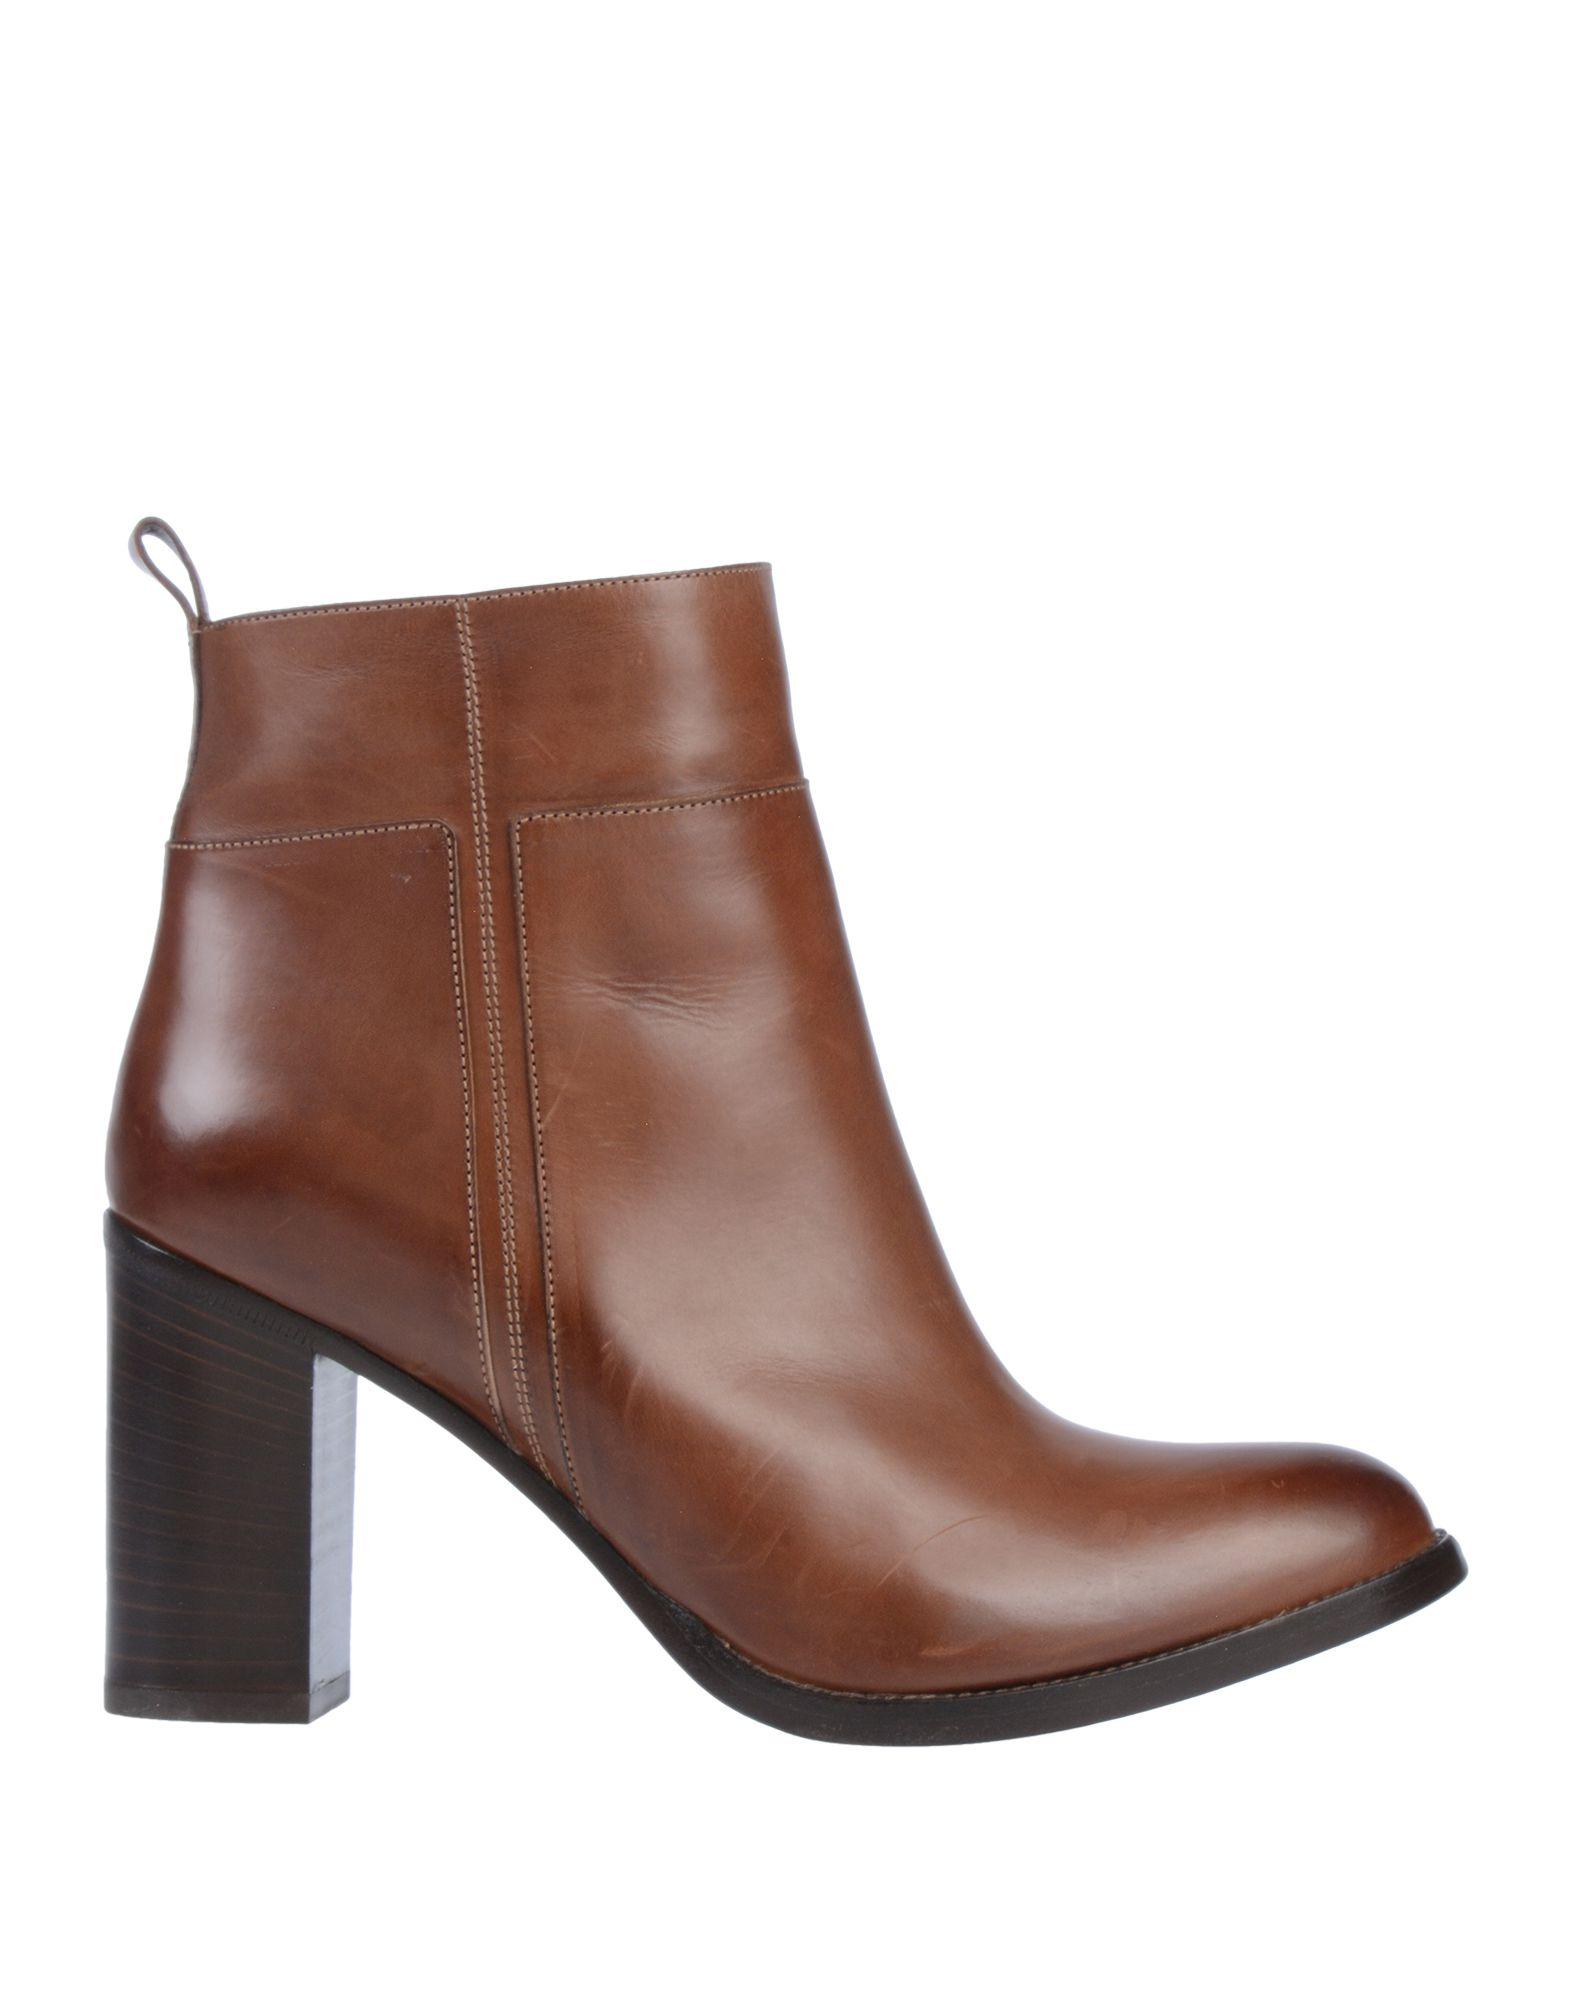 Sartore Ankle Boots in Brown - Lyst